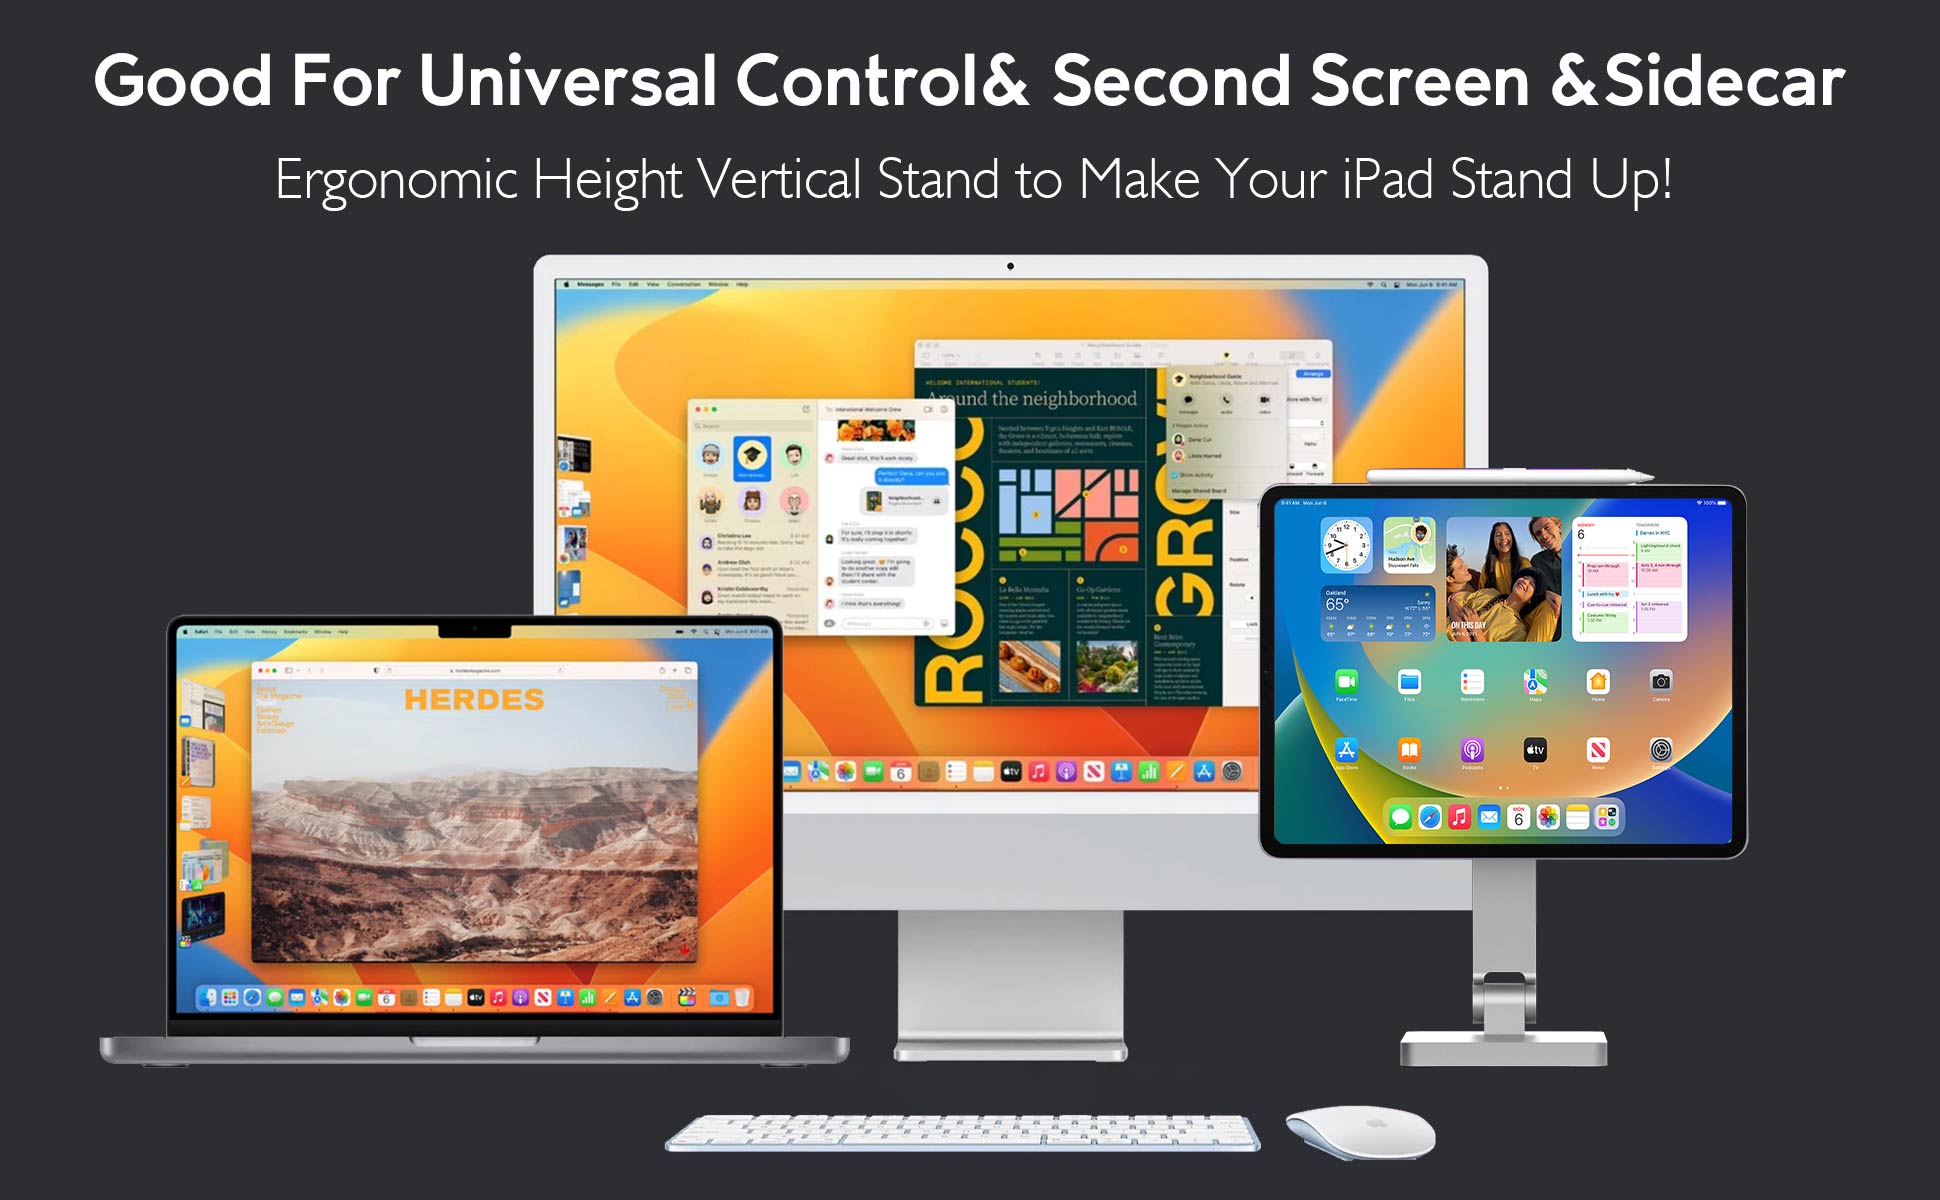 Ipadpro-dock-stand-Good-for-universalcontrol-second-screen-sidecar-expansion-screen-holders